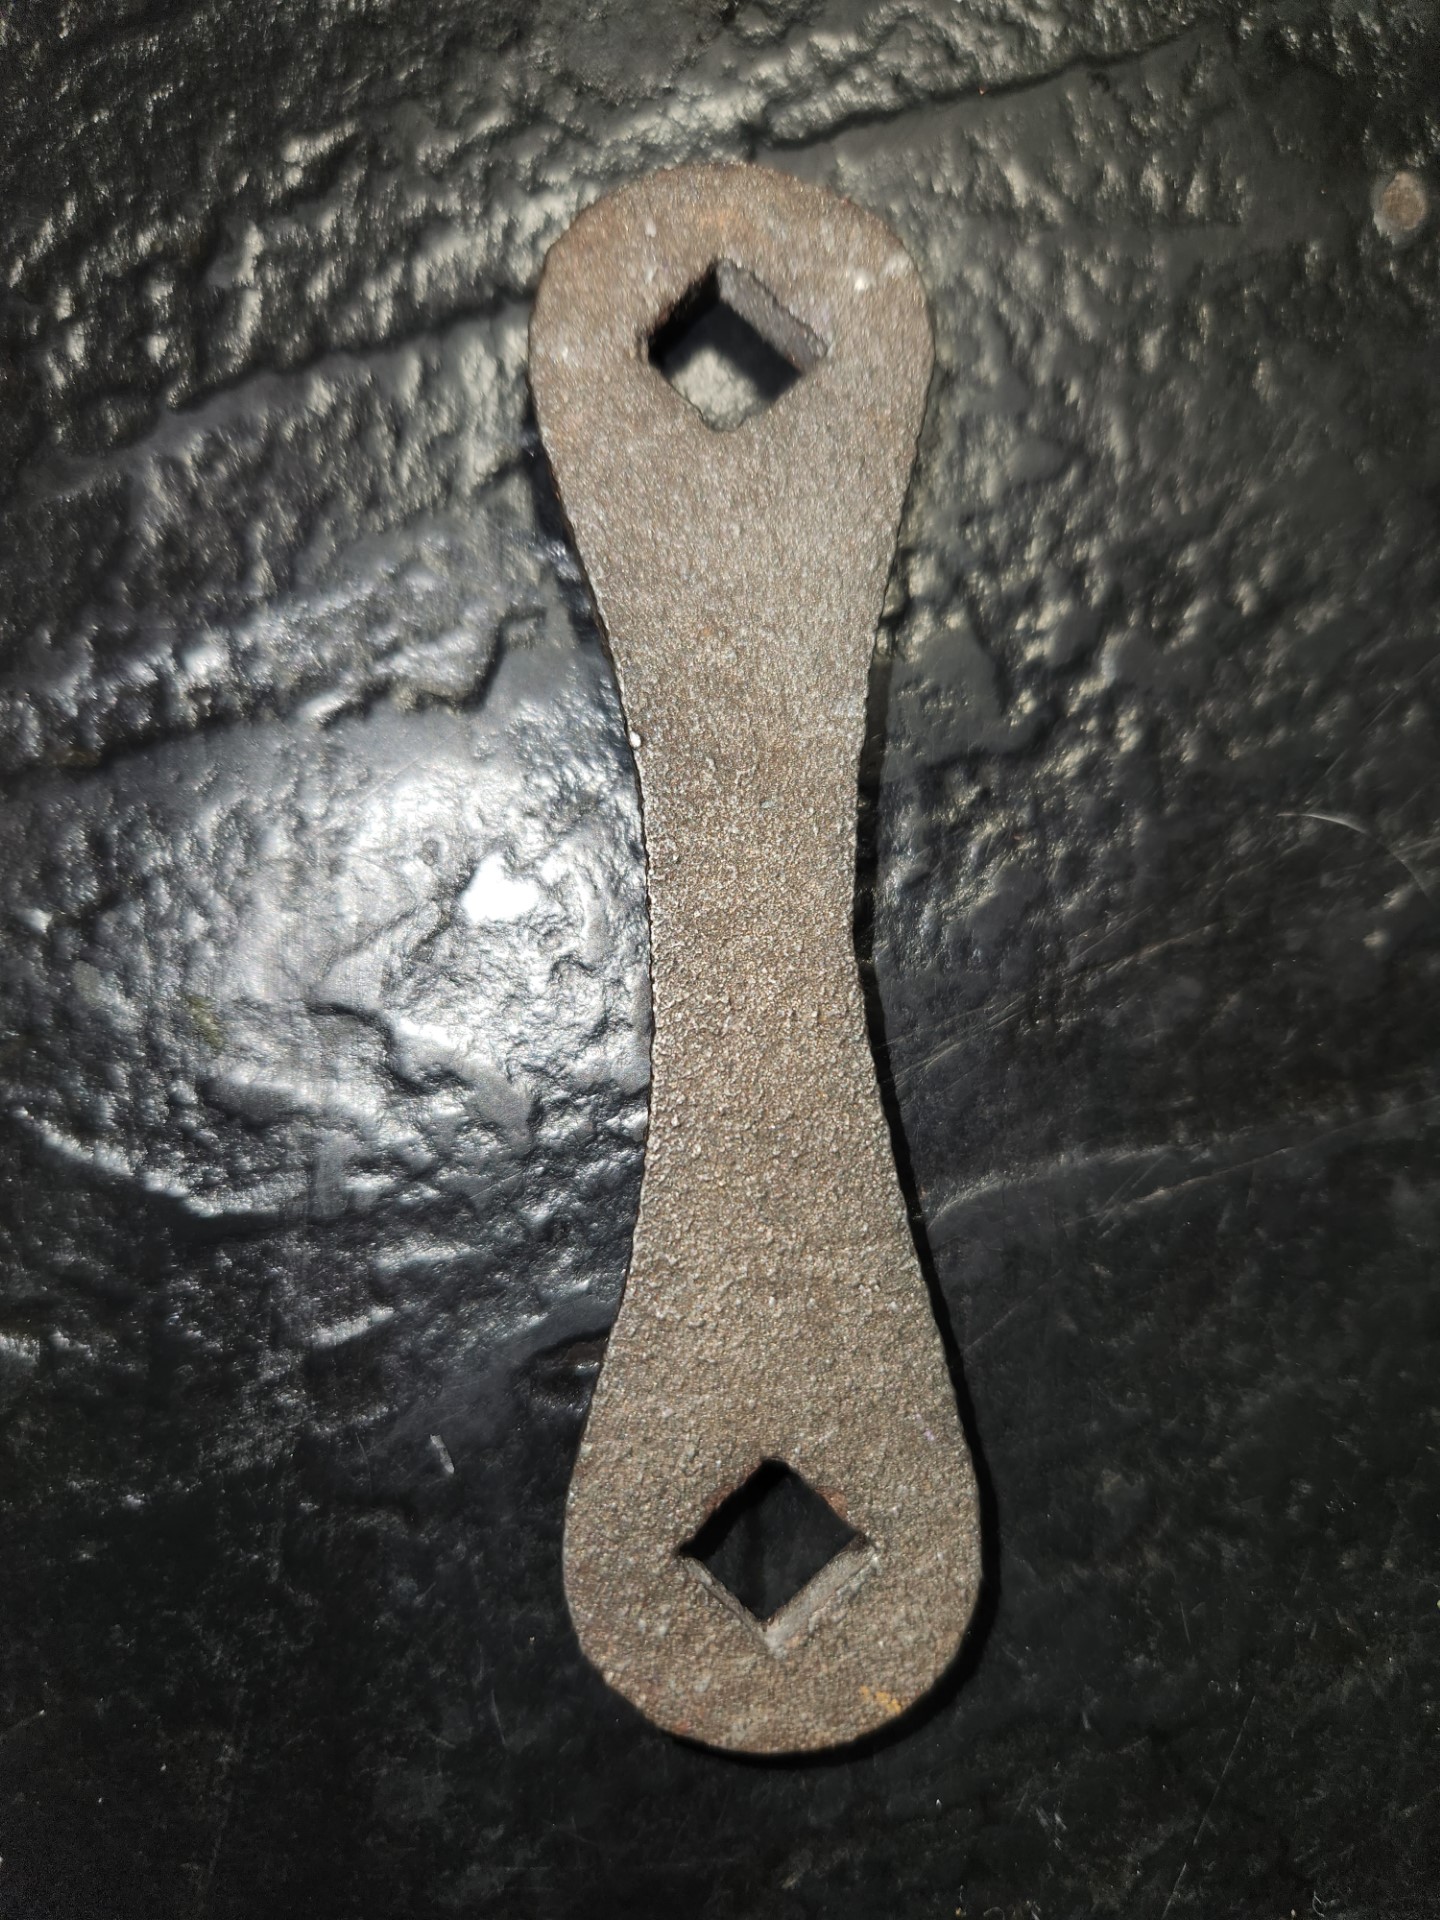 What is this tool used for??????